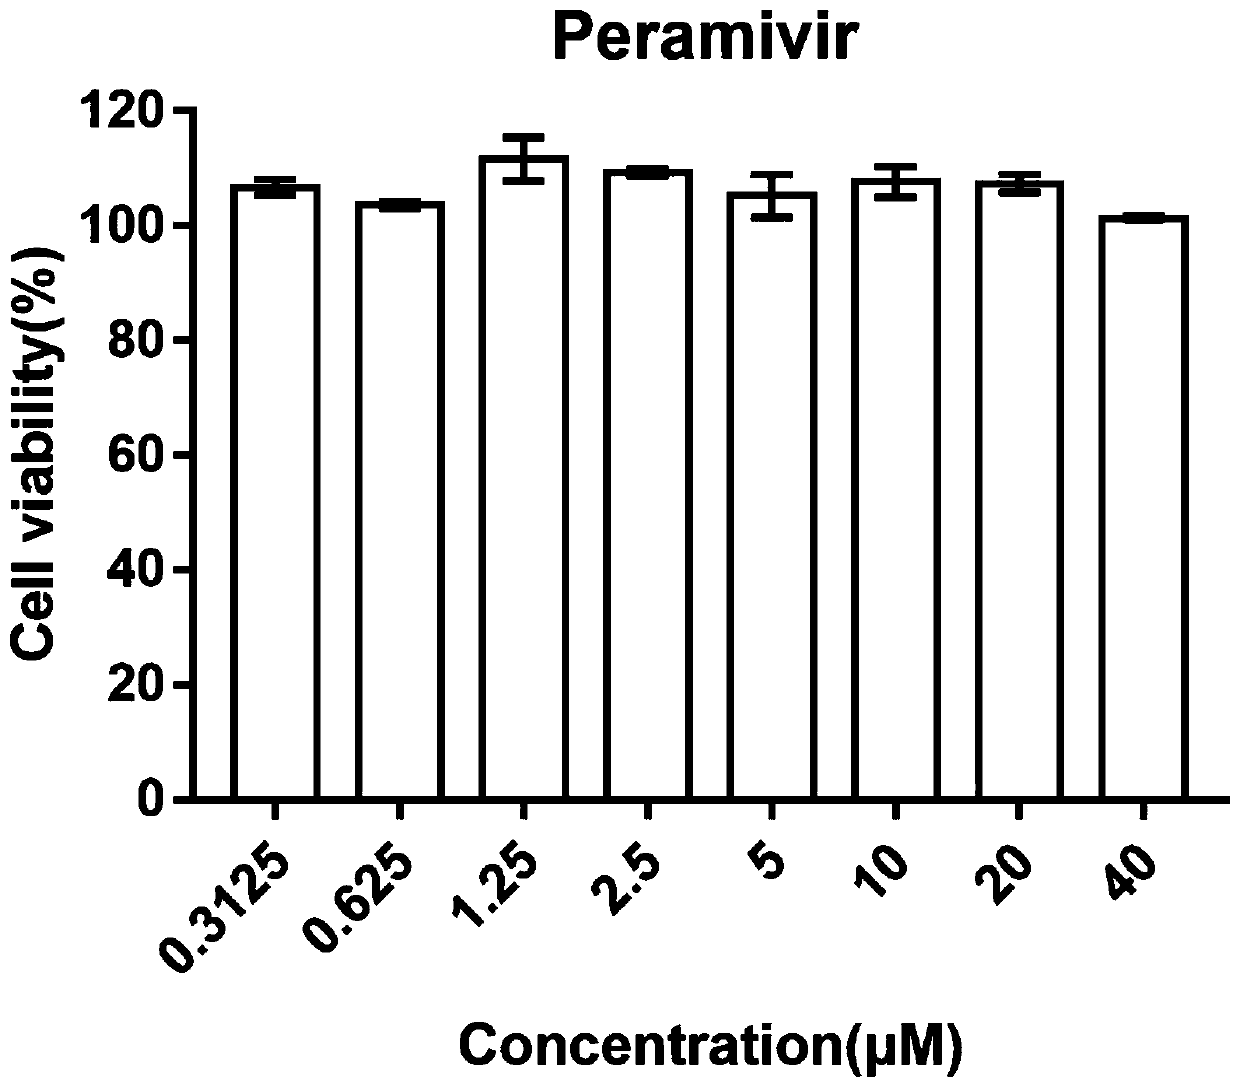 Application of paramivir in preparation of medicine for treating cytokine storm syndrome caused by infectious diseases